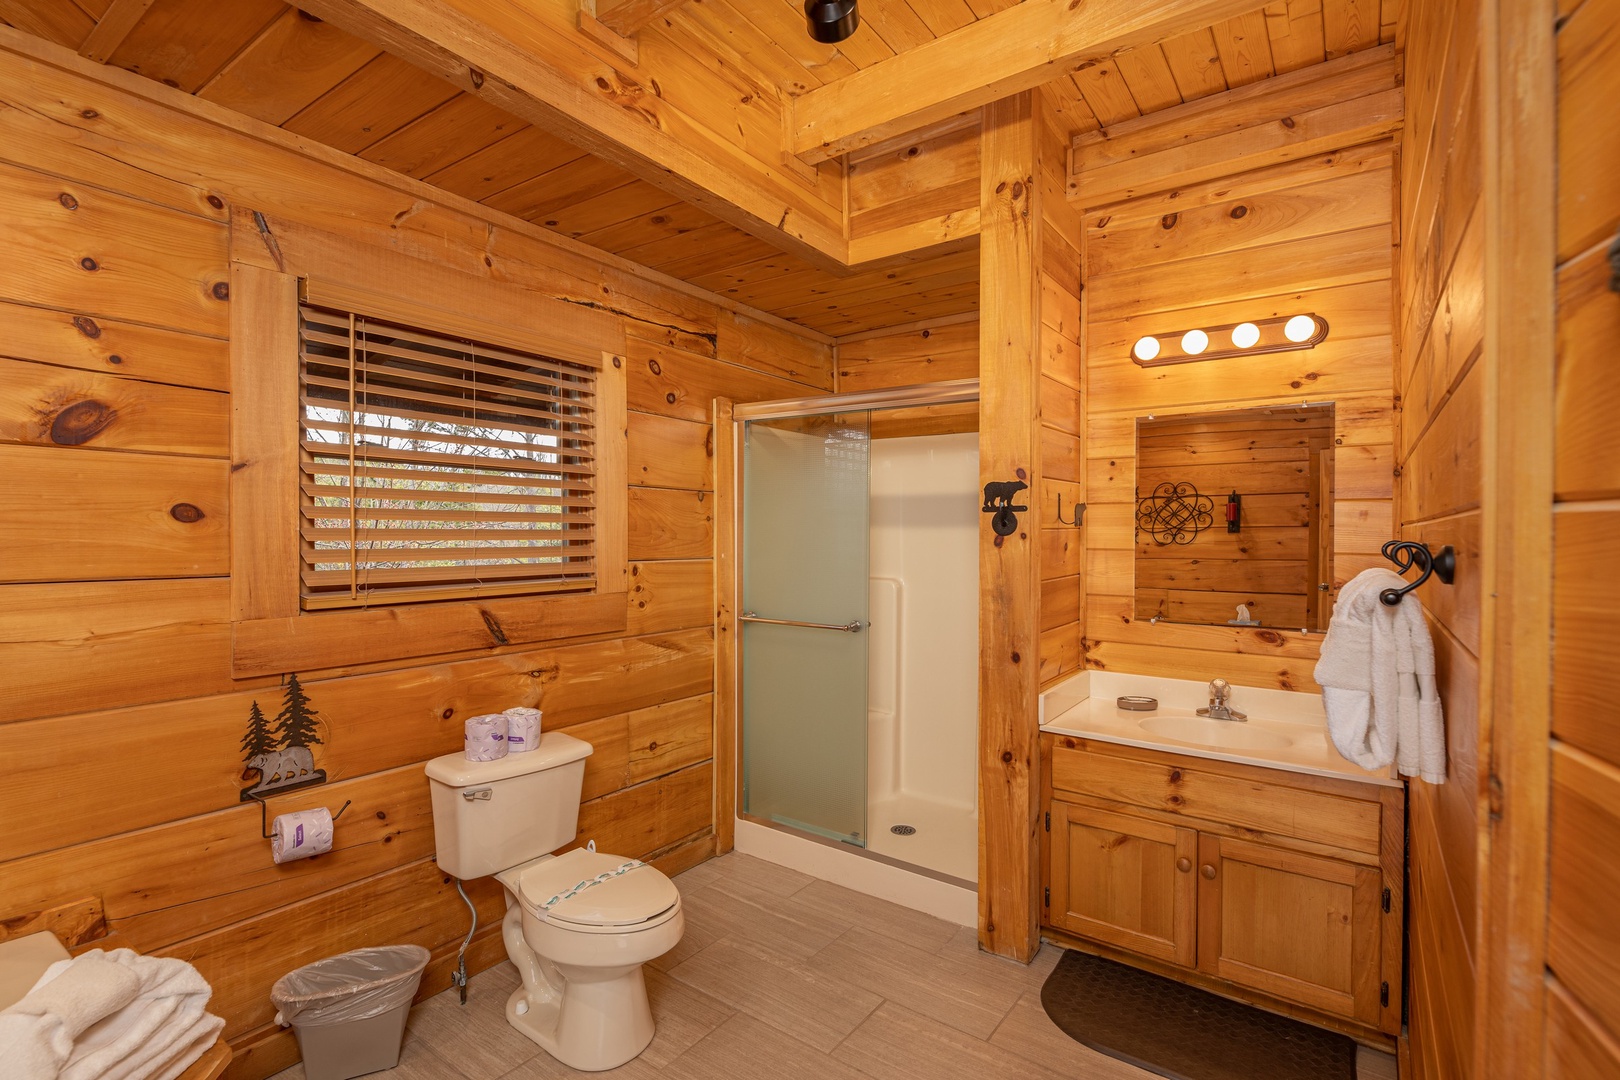 Bathroom with a shower at Livin' Simple, a 2 bedroom cabin rental located in Pigeon Forge